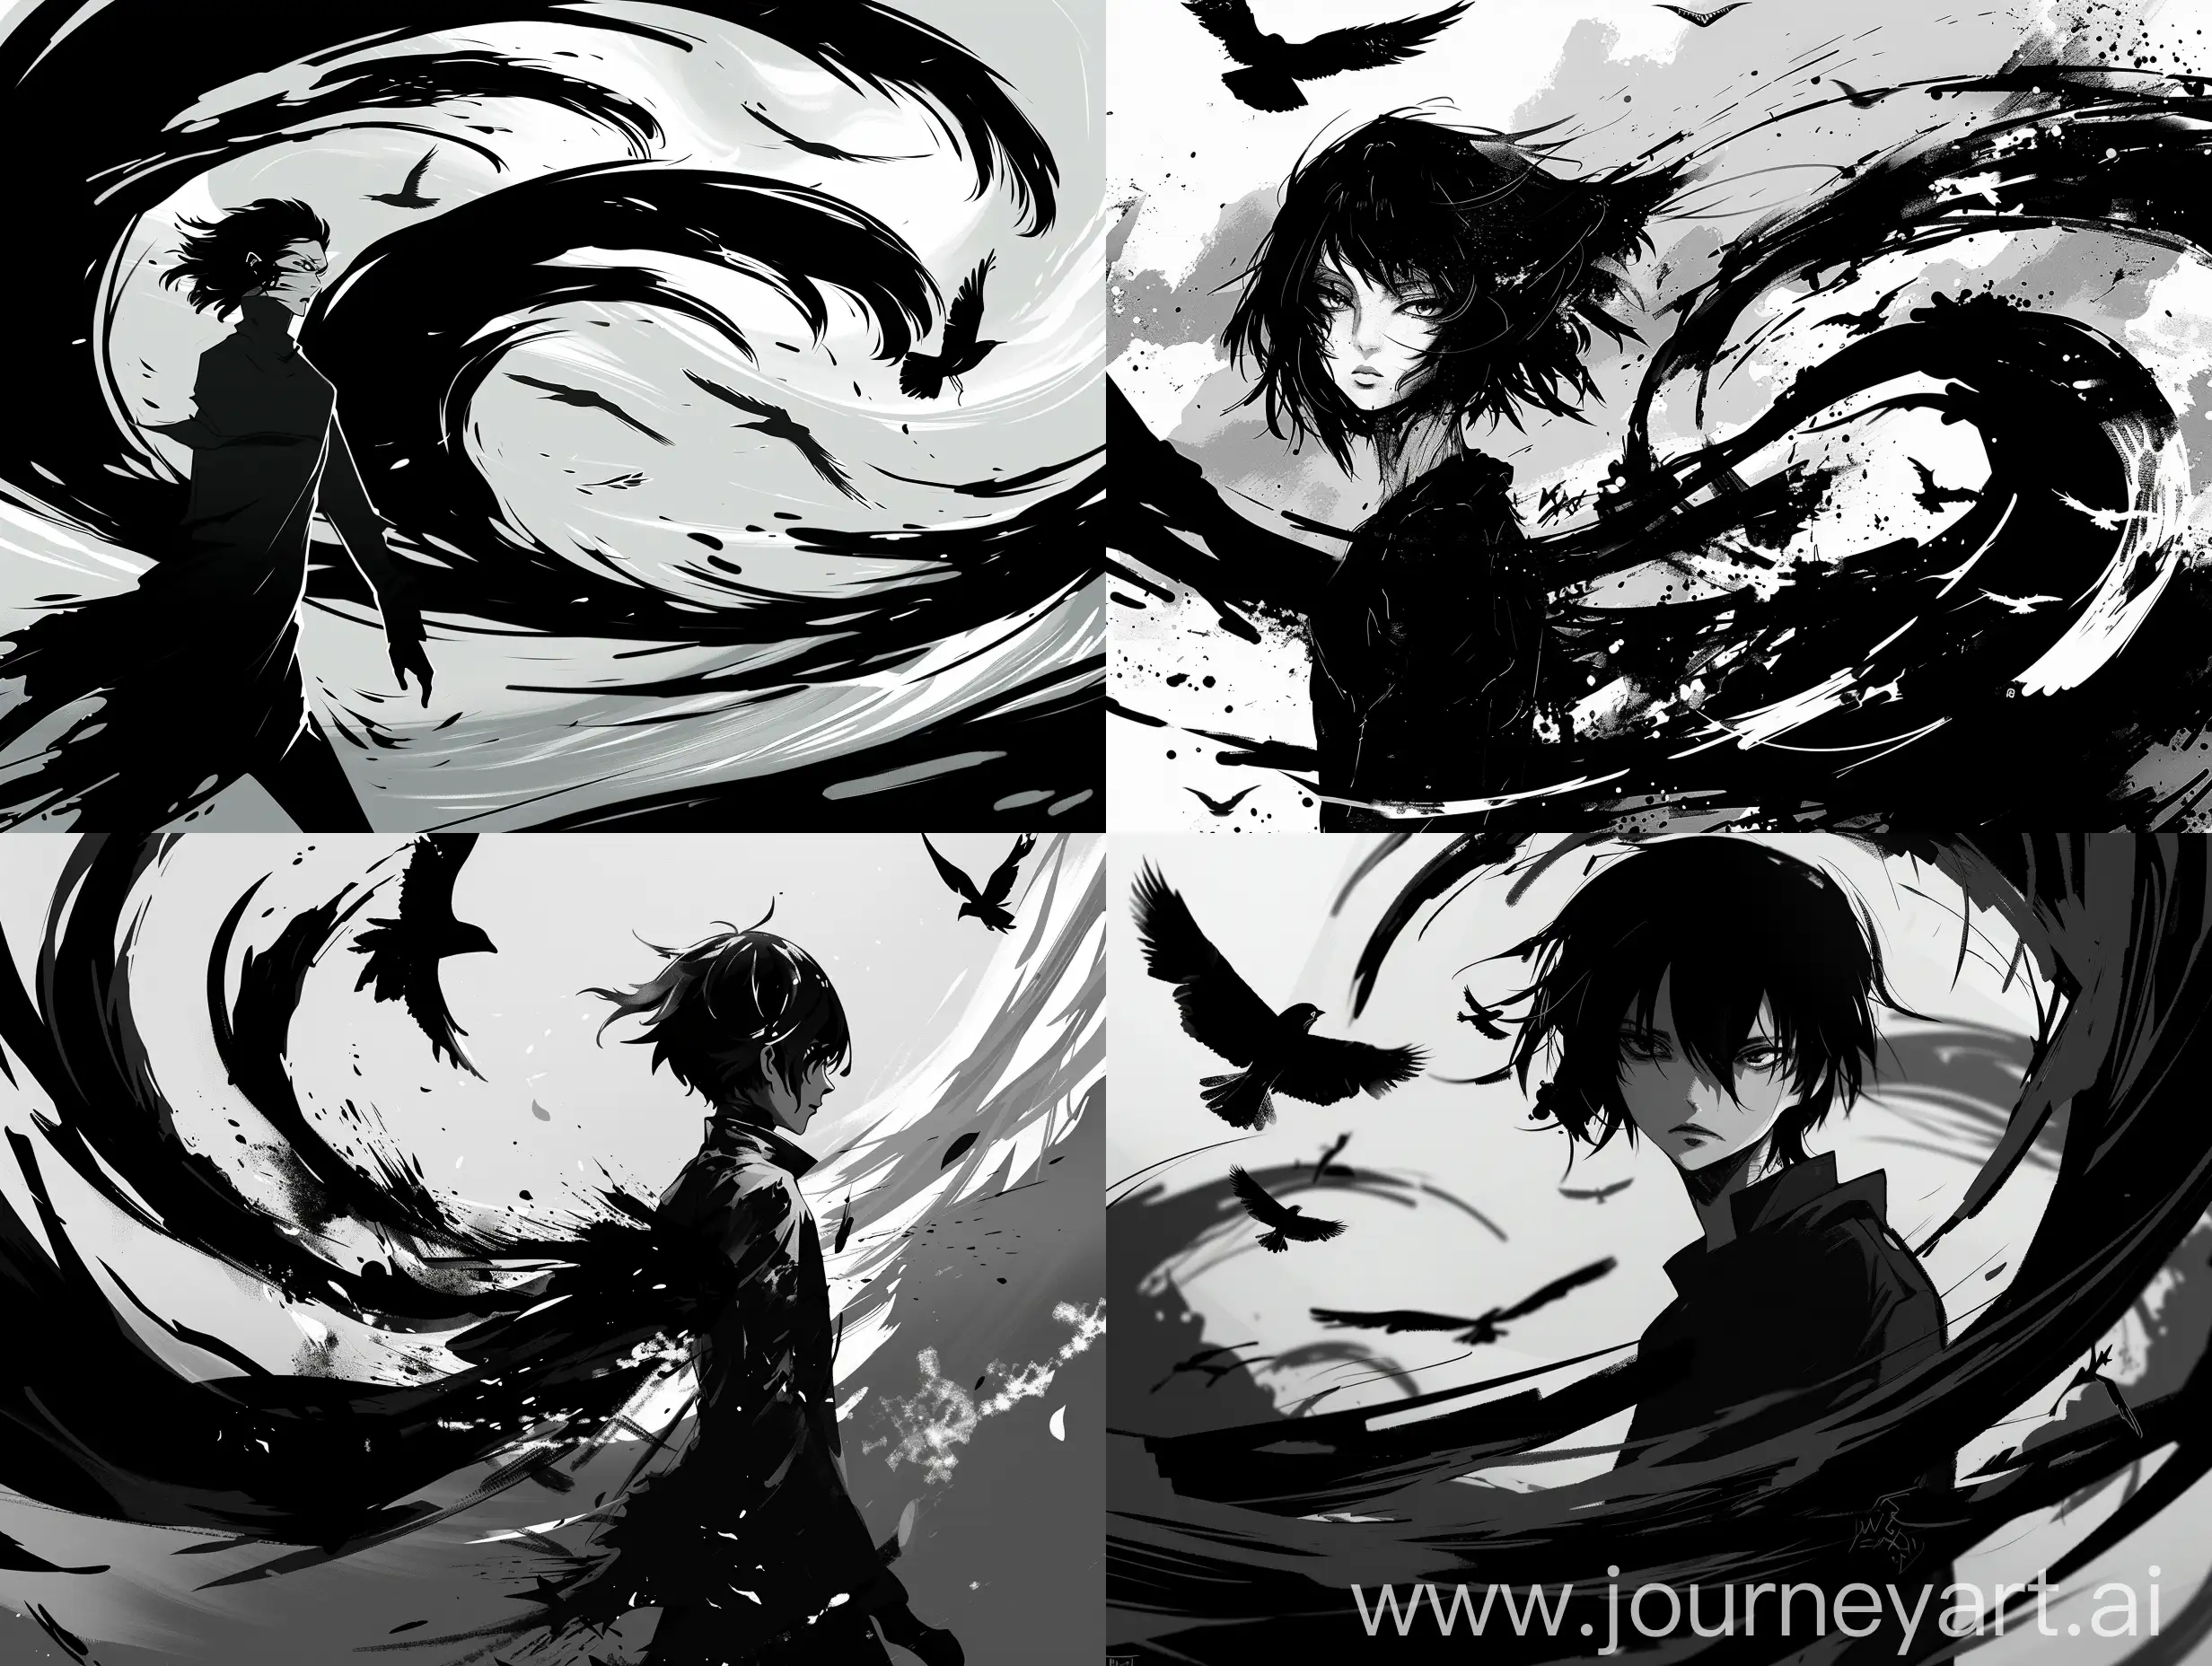 "Create a dramatic black and white anime-style artwork featuring a character who is unafraid of death but haunted by the fear of leaving behind an unremarkable legacy. This character is determined to achieve greatness through their own actions, believing that they alone hold the power to shape their destiny. The artwork should convey a sense of inner turmoil and determination, with the character exuding a cool and confident demeanor despite their internal struggle. Incorporate symbolic elements such as swirling shadows and soaring birds to represent the ever-present specter of mortality and the soaring aspirations of the character. Pay close attention to composition, using dynamic angles and stark contrasts to heighten the drama and intensity of the scene. Ultimately, the artwork should evoke a profound sense of the human spirit's capacity for resilience and the relentless pursuit of greatness."